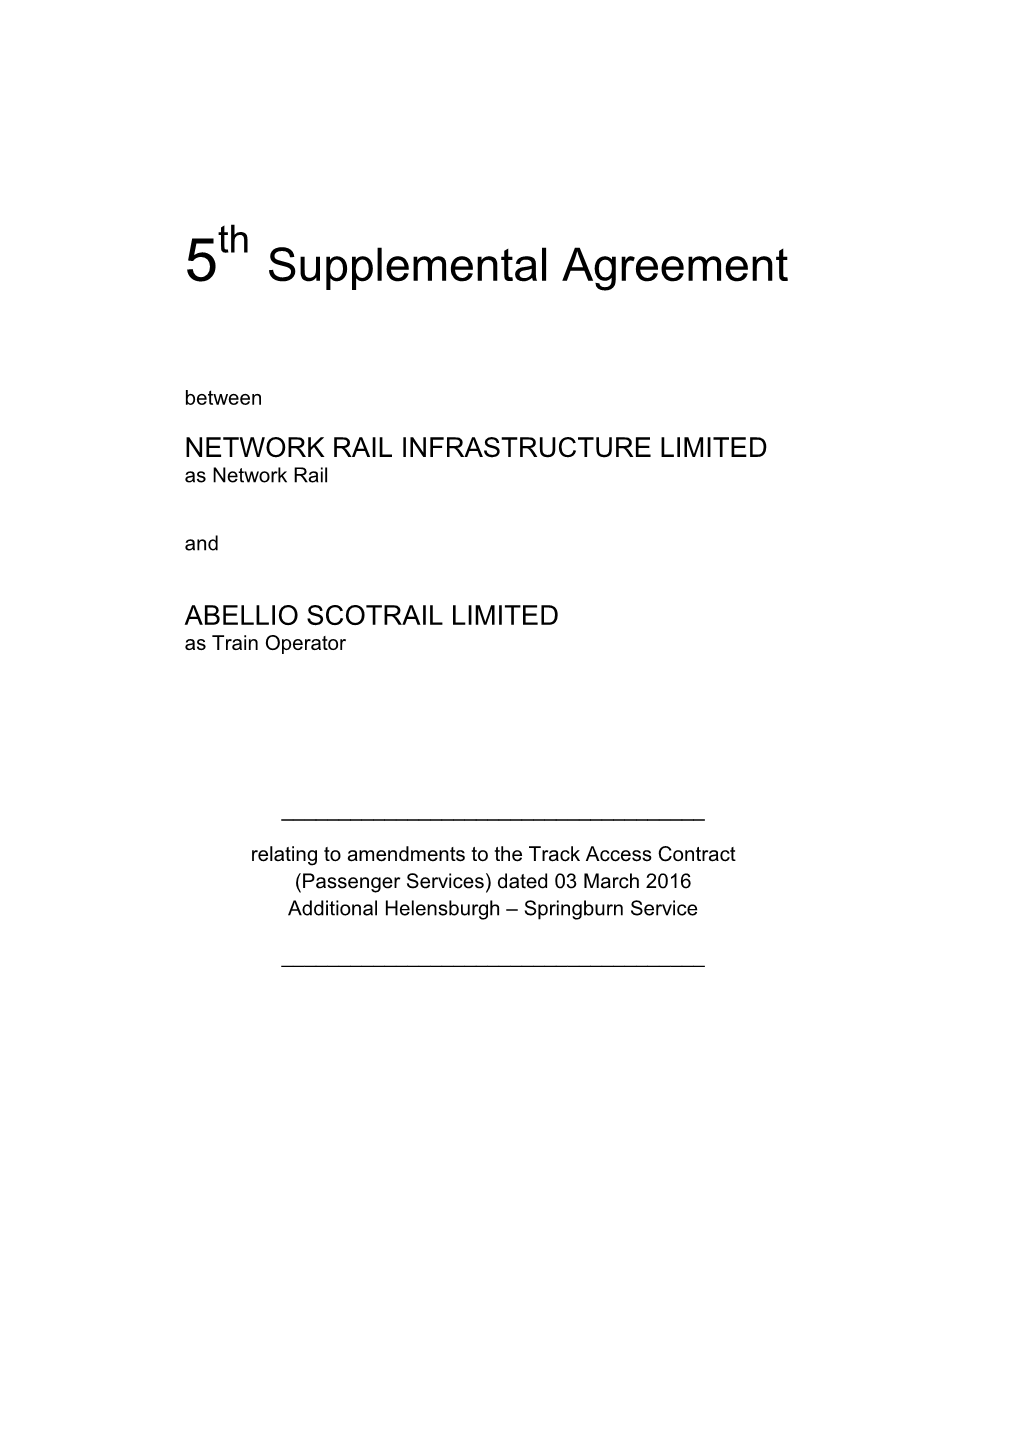 Abellio Scotrail 5Th SA Approved Agreement